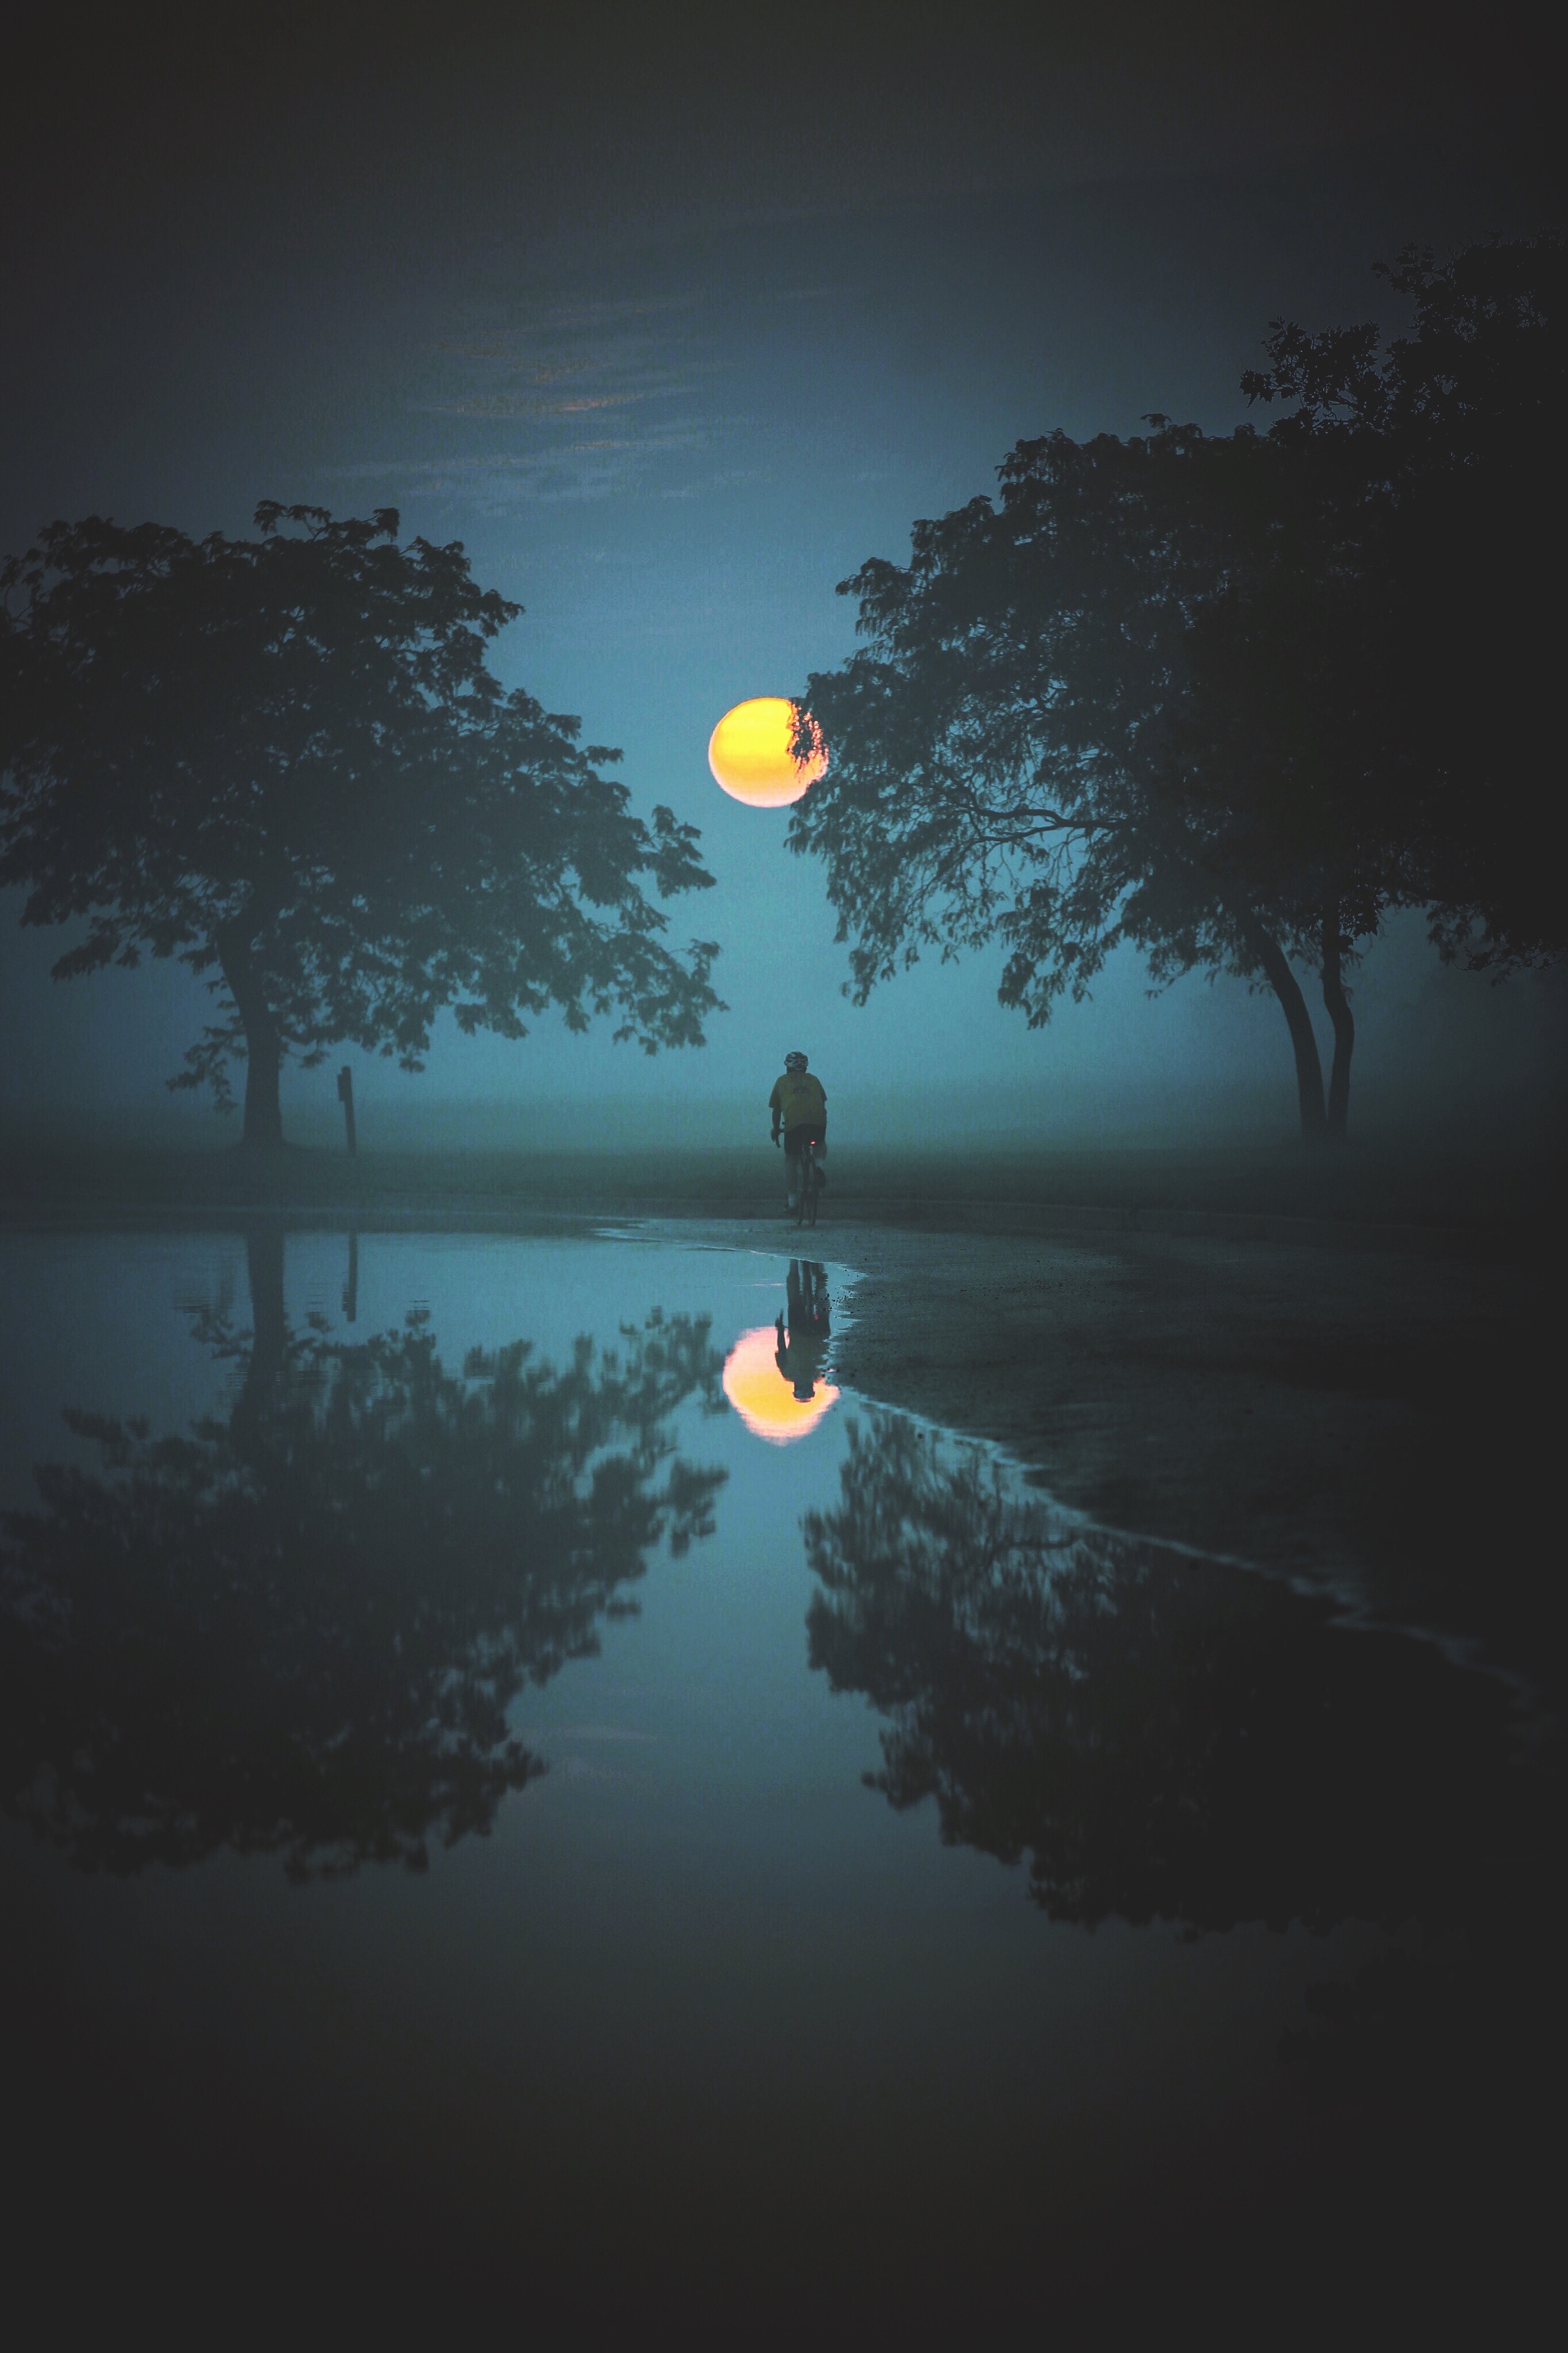 reflection, moon, nature, water, trees, fog, cyclist lock screen backgrounds